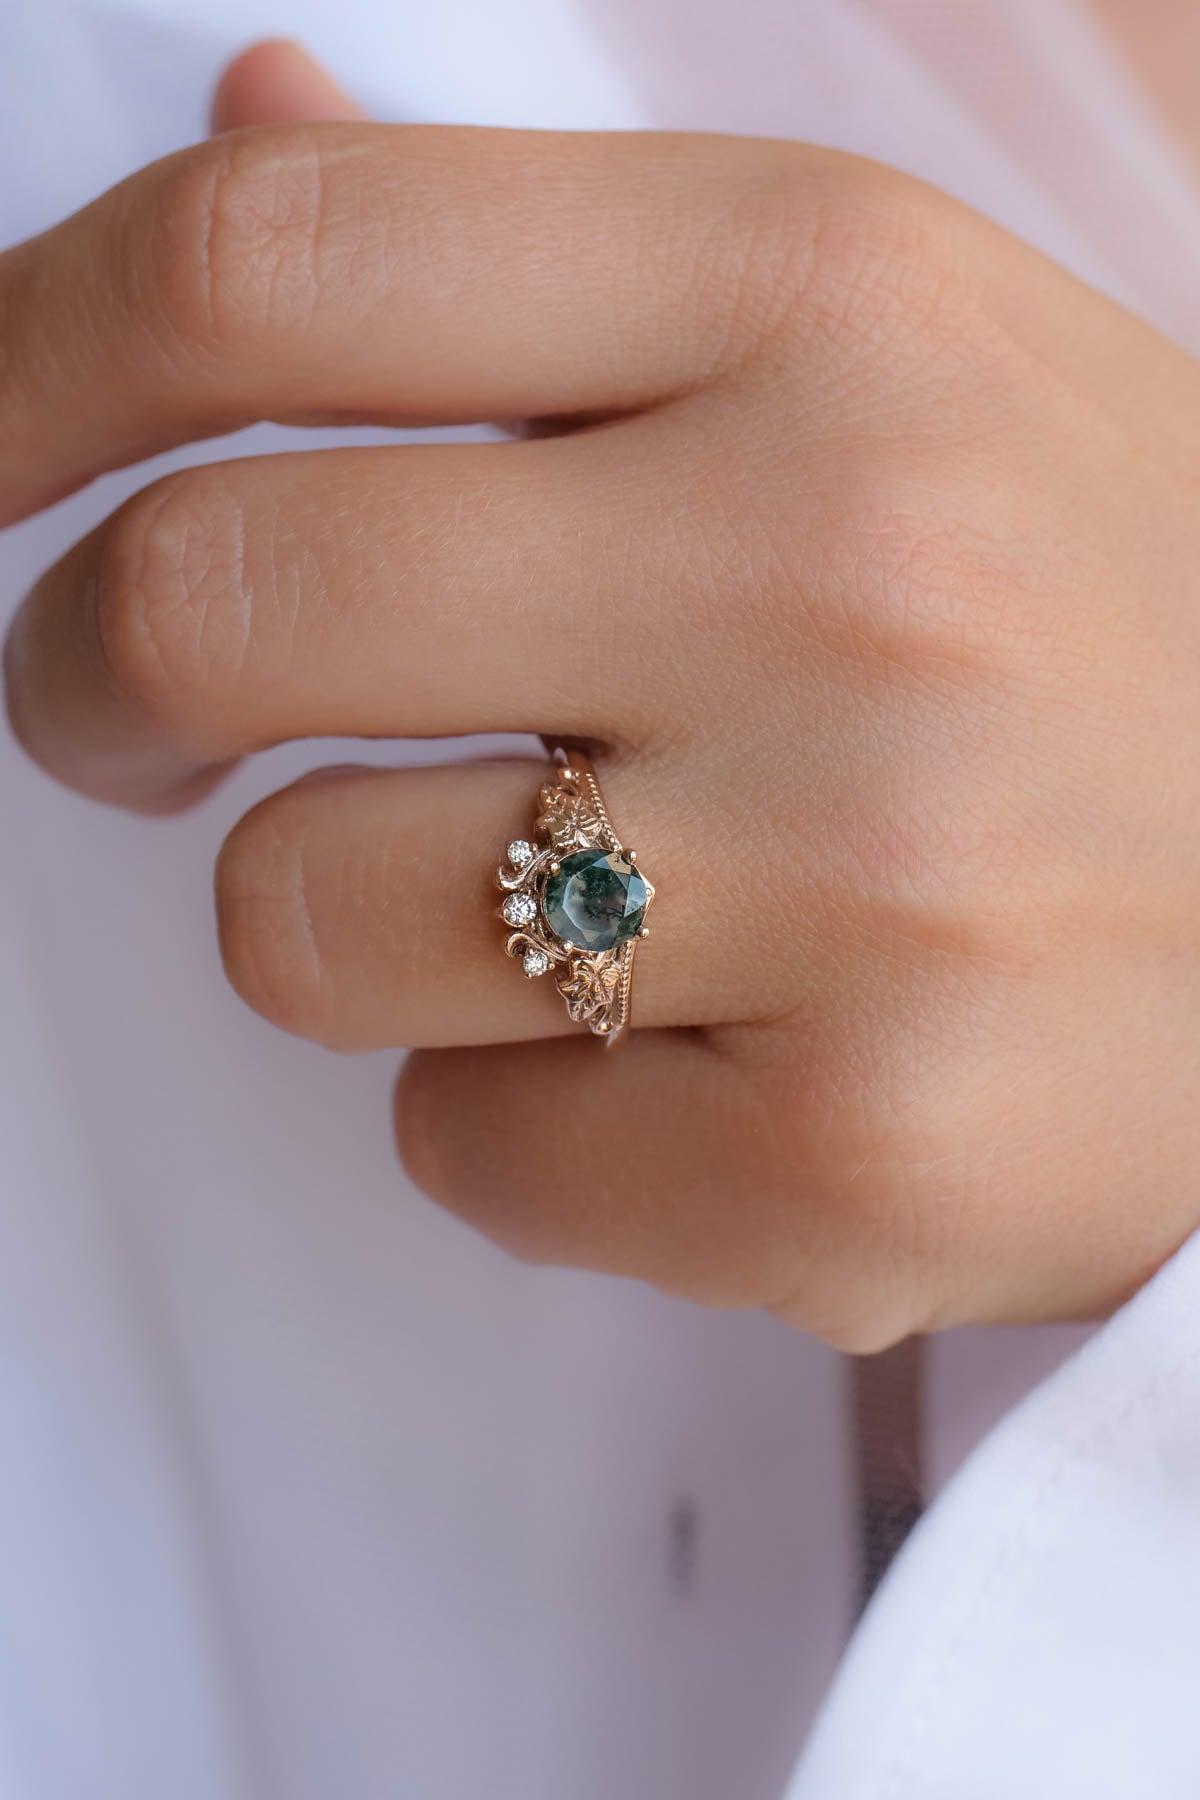 Green moss agate engagement ring, promise ring with diamonds